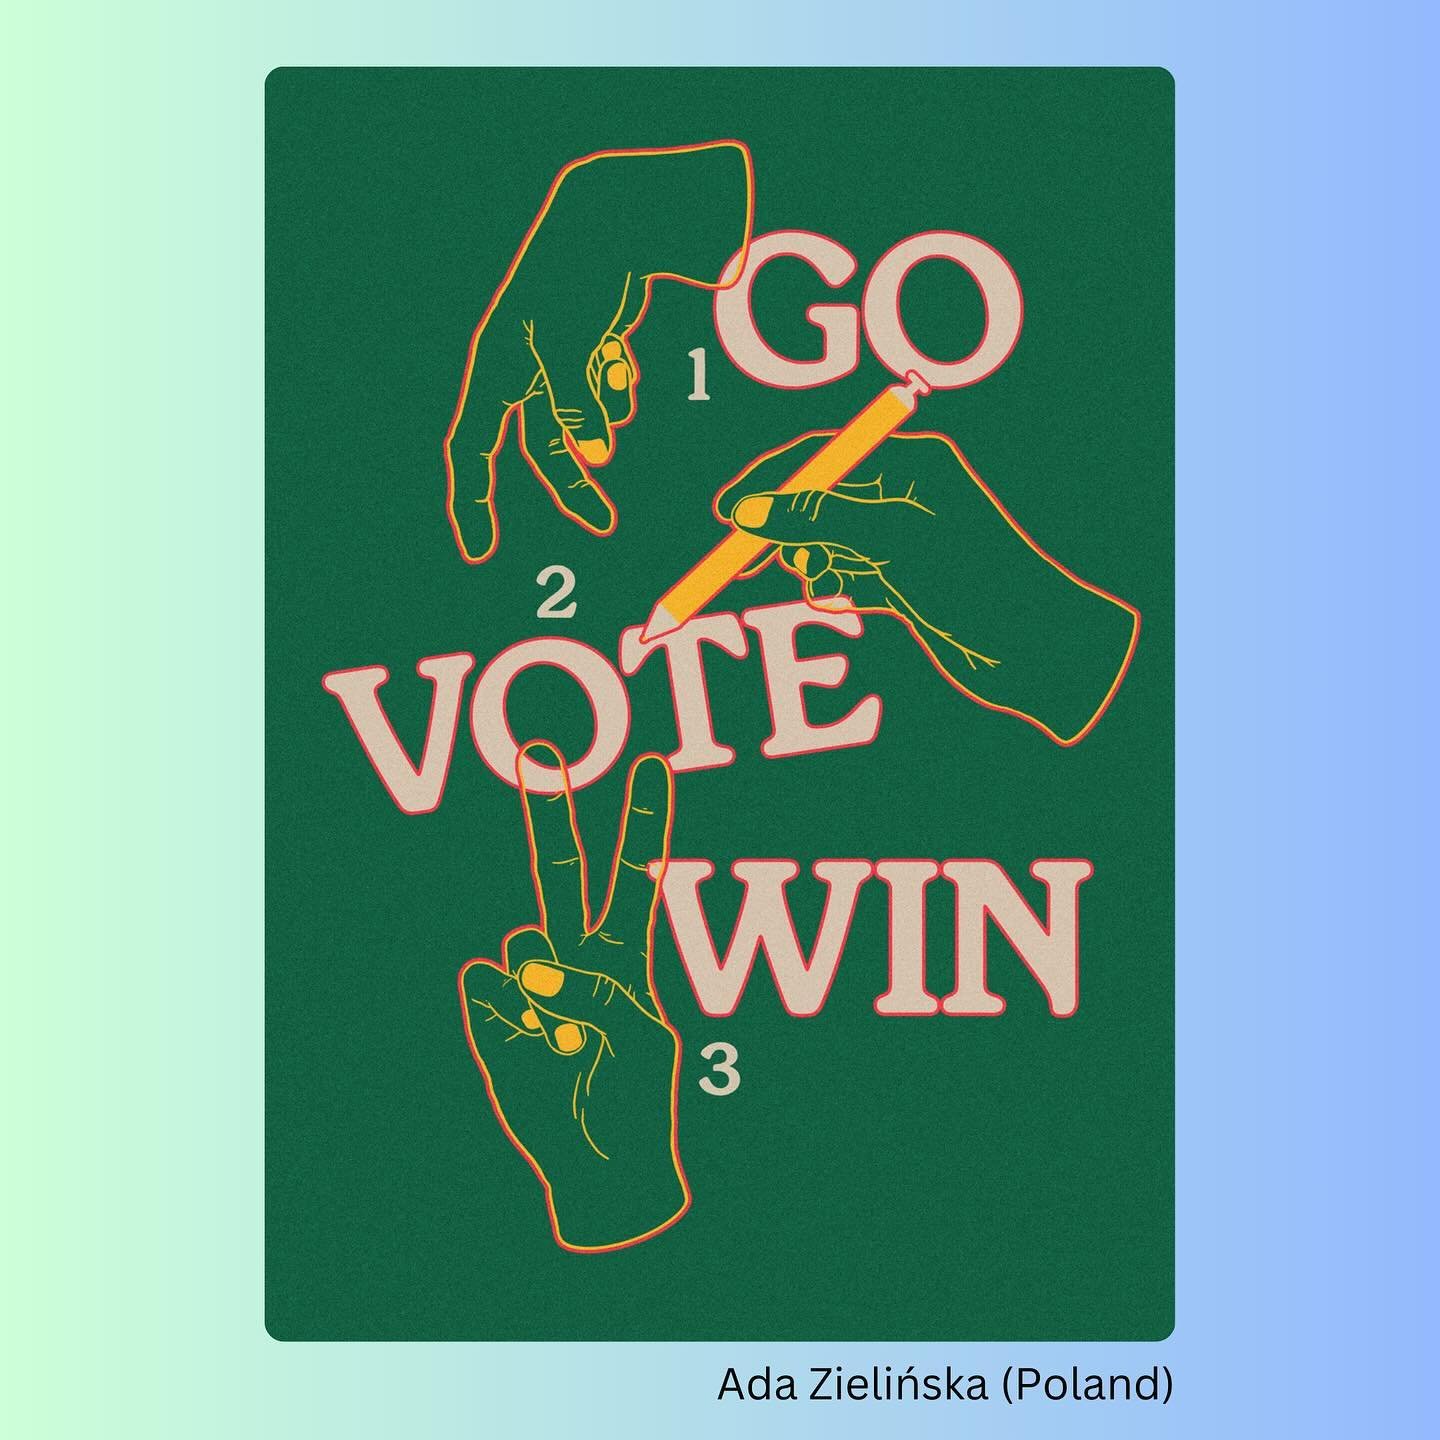 🥳 It&rsquo;s Europe Day, and we&rsquo;re celebrating by spotlighting the brilliant works &amp; artists, part of our Get Out &amp; Vote Campaign&nbsp; fineacts.co/get-out (link in bio)  🙌 A huge thank you to the second batch of amazing talent:  🔥 A